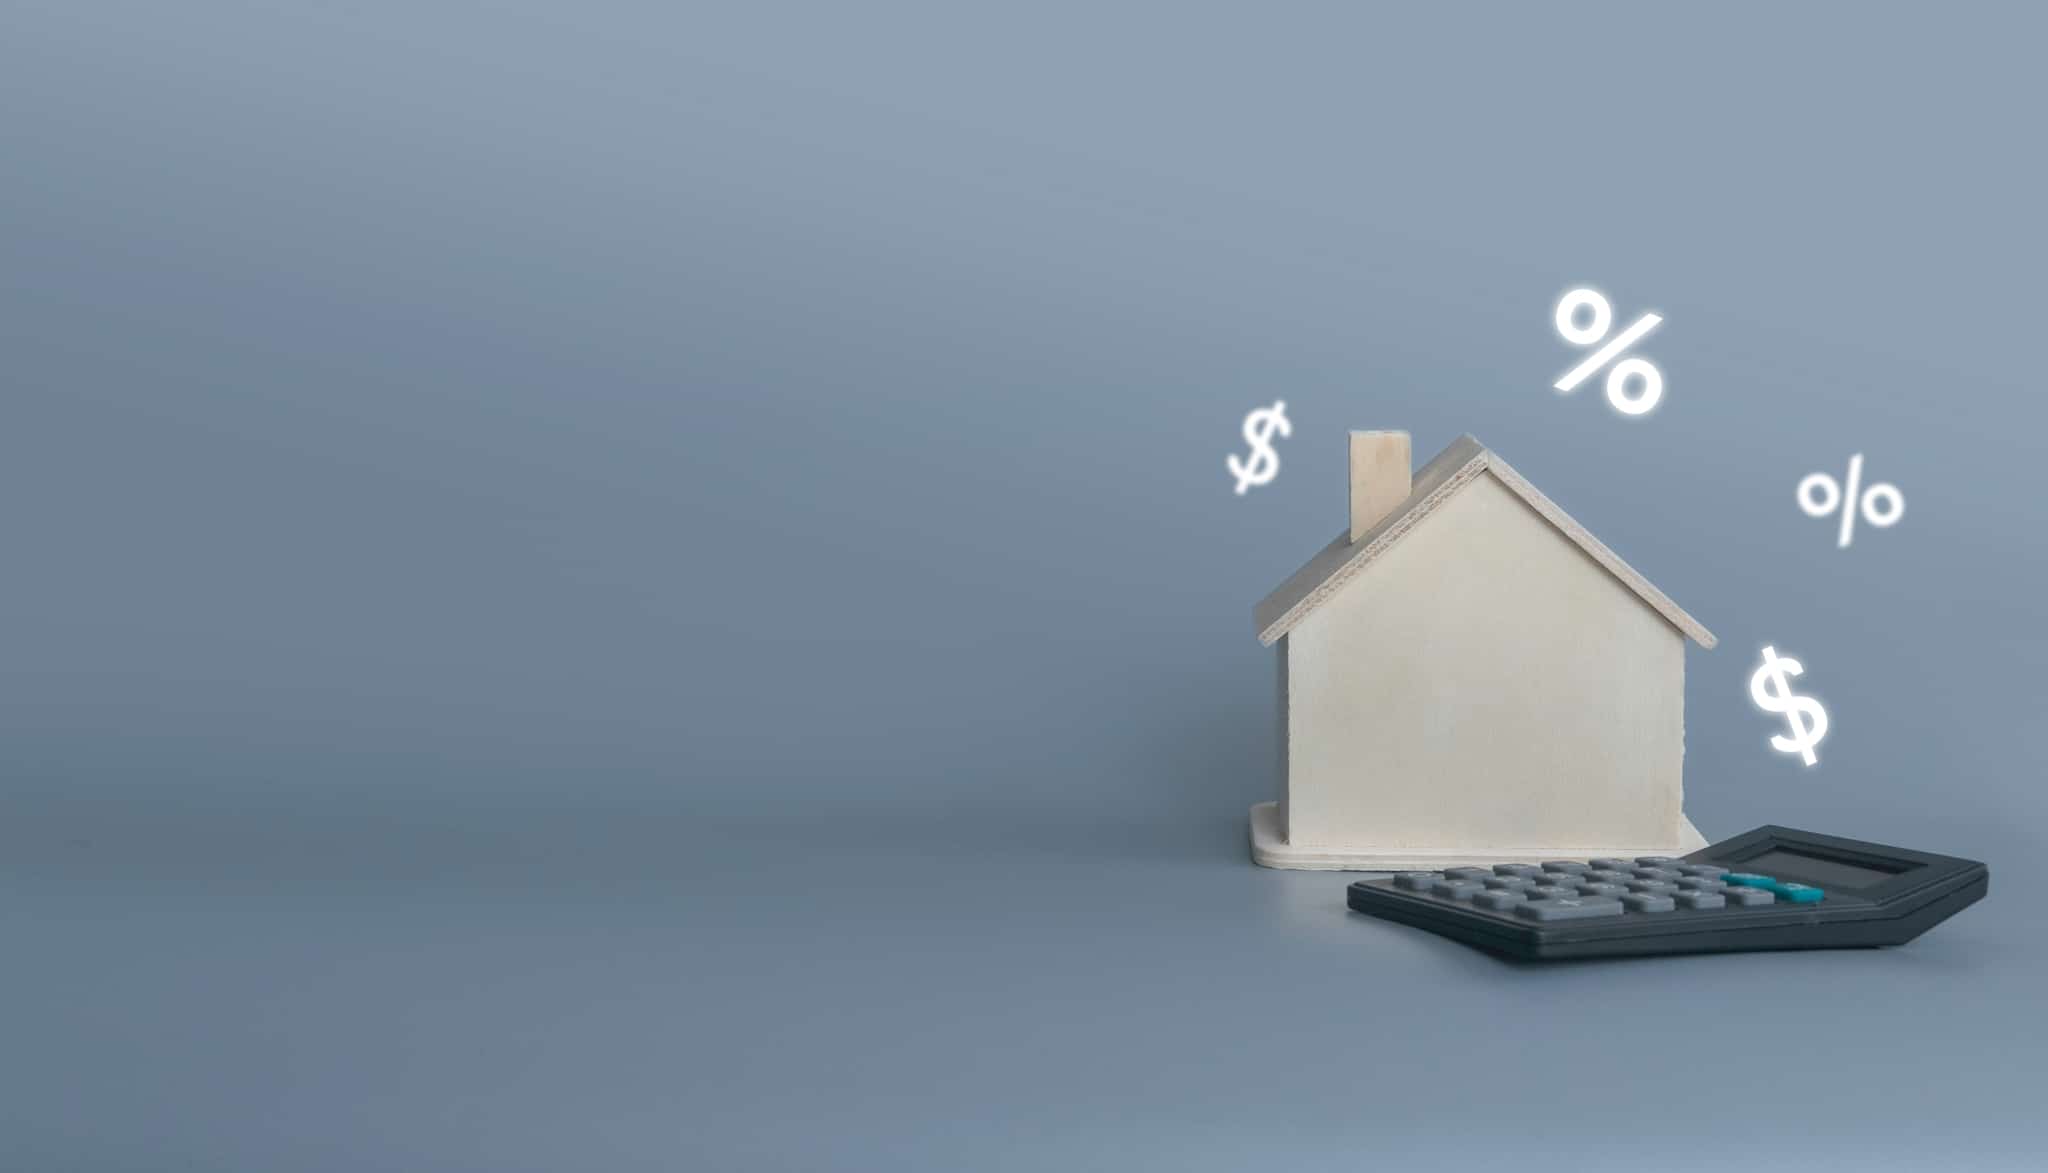 photographic production shows only a house surrounded by various financial symbols and accompanied by a calculator